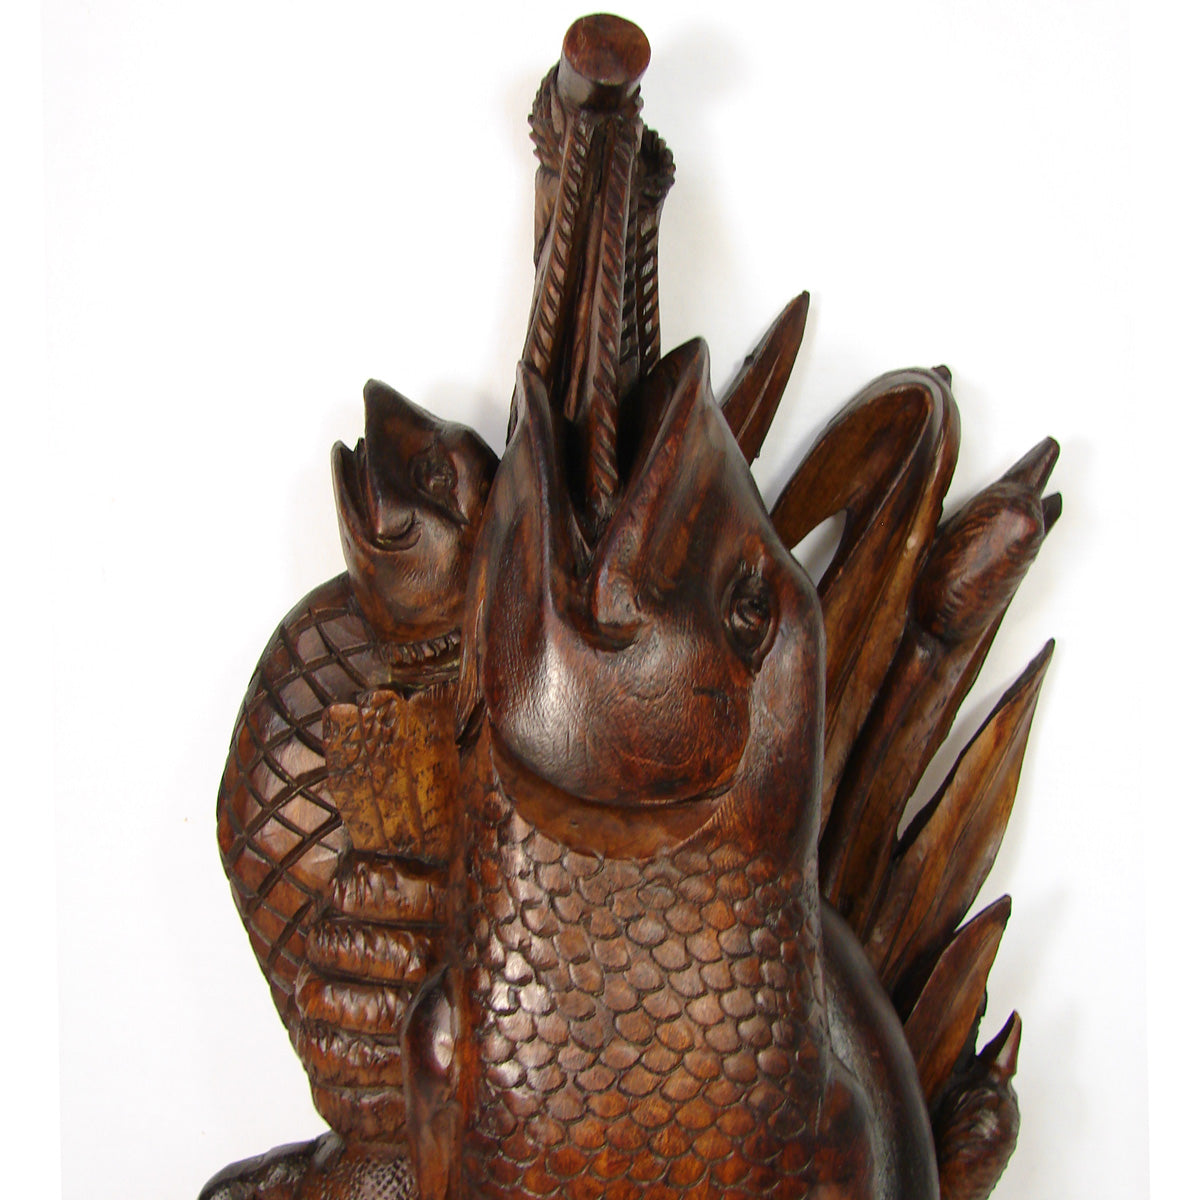 Antique Victorian to Edwardian Era Black Forest Style Carved 16.5” Plaque, Maritime Fish Theme